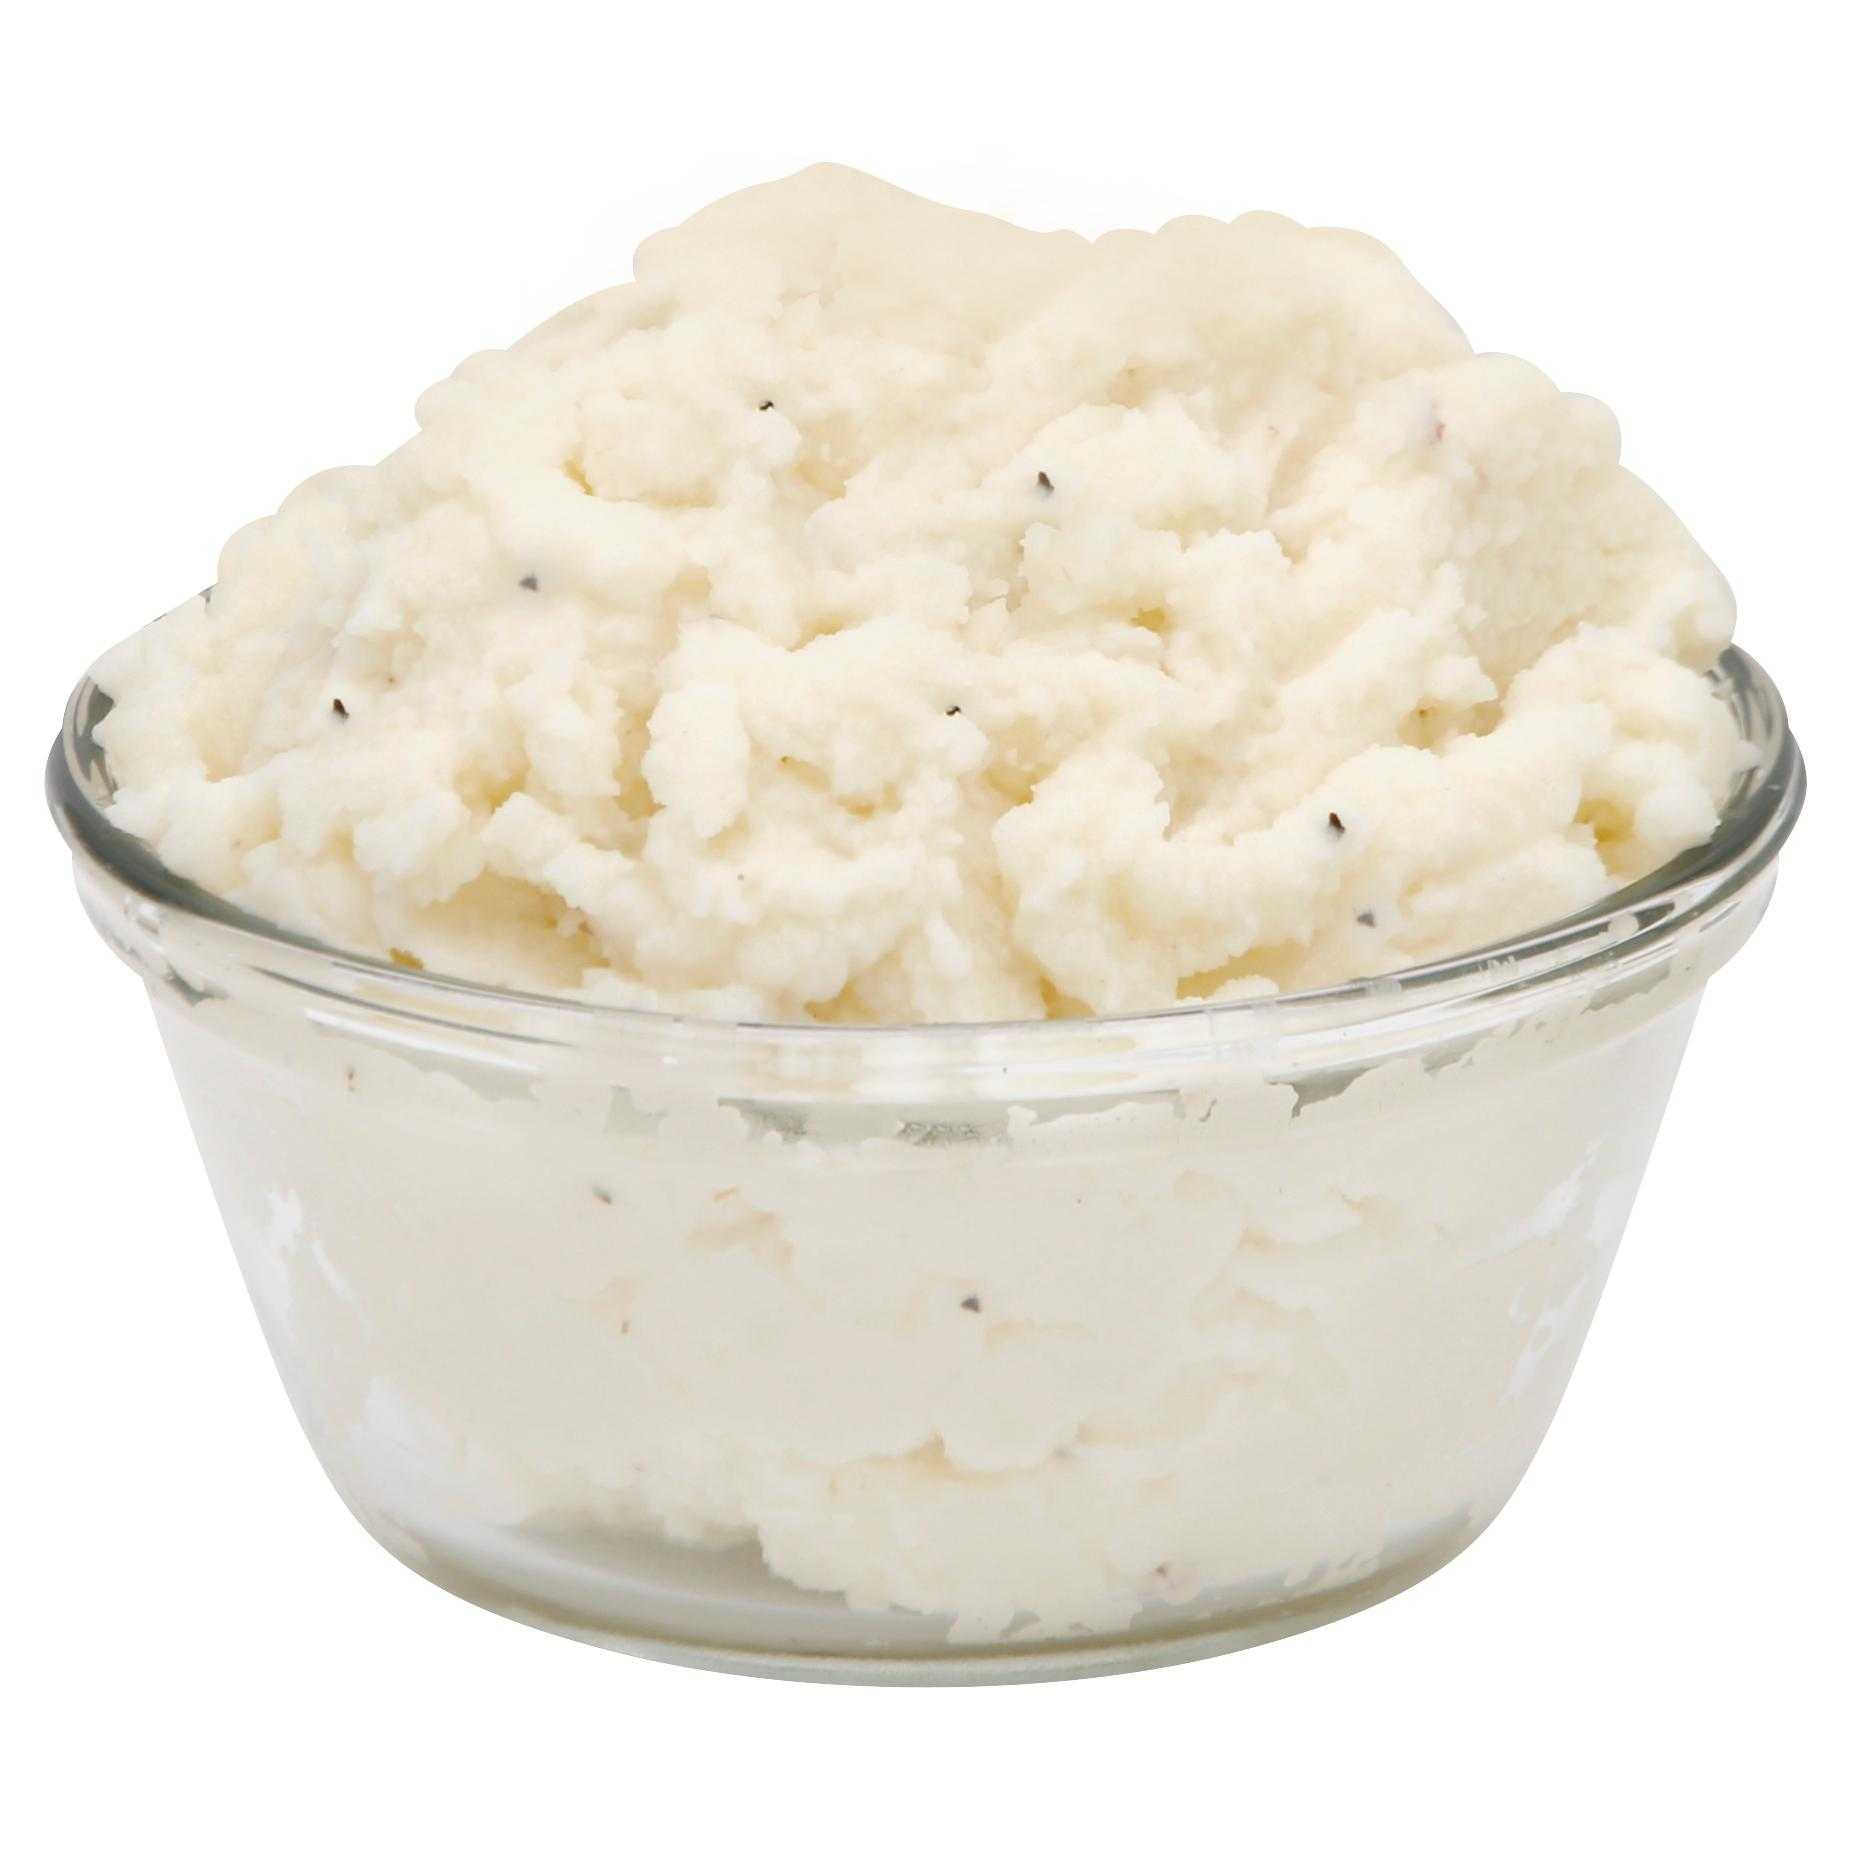 Simply Potatoes® Refrigerated Home-style Mashed Potatoes made with peeled russet potatoes, 4/6 Lb Bags